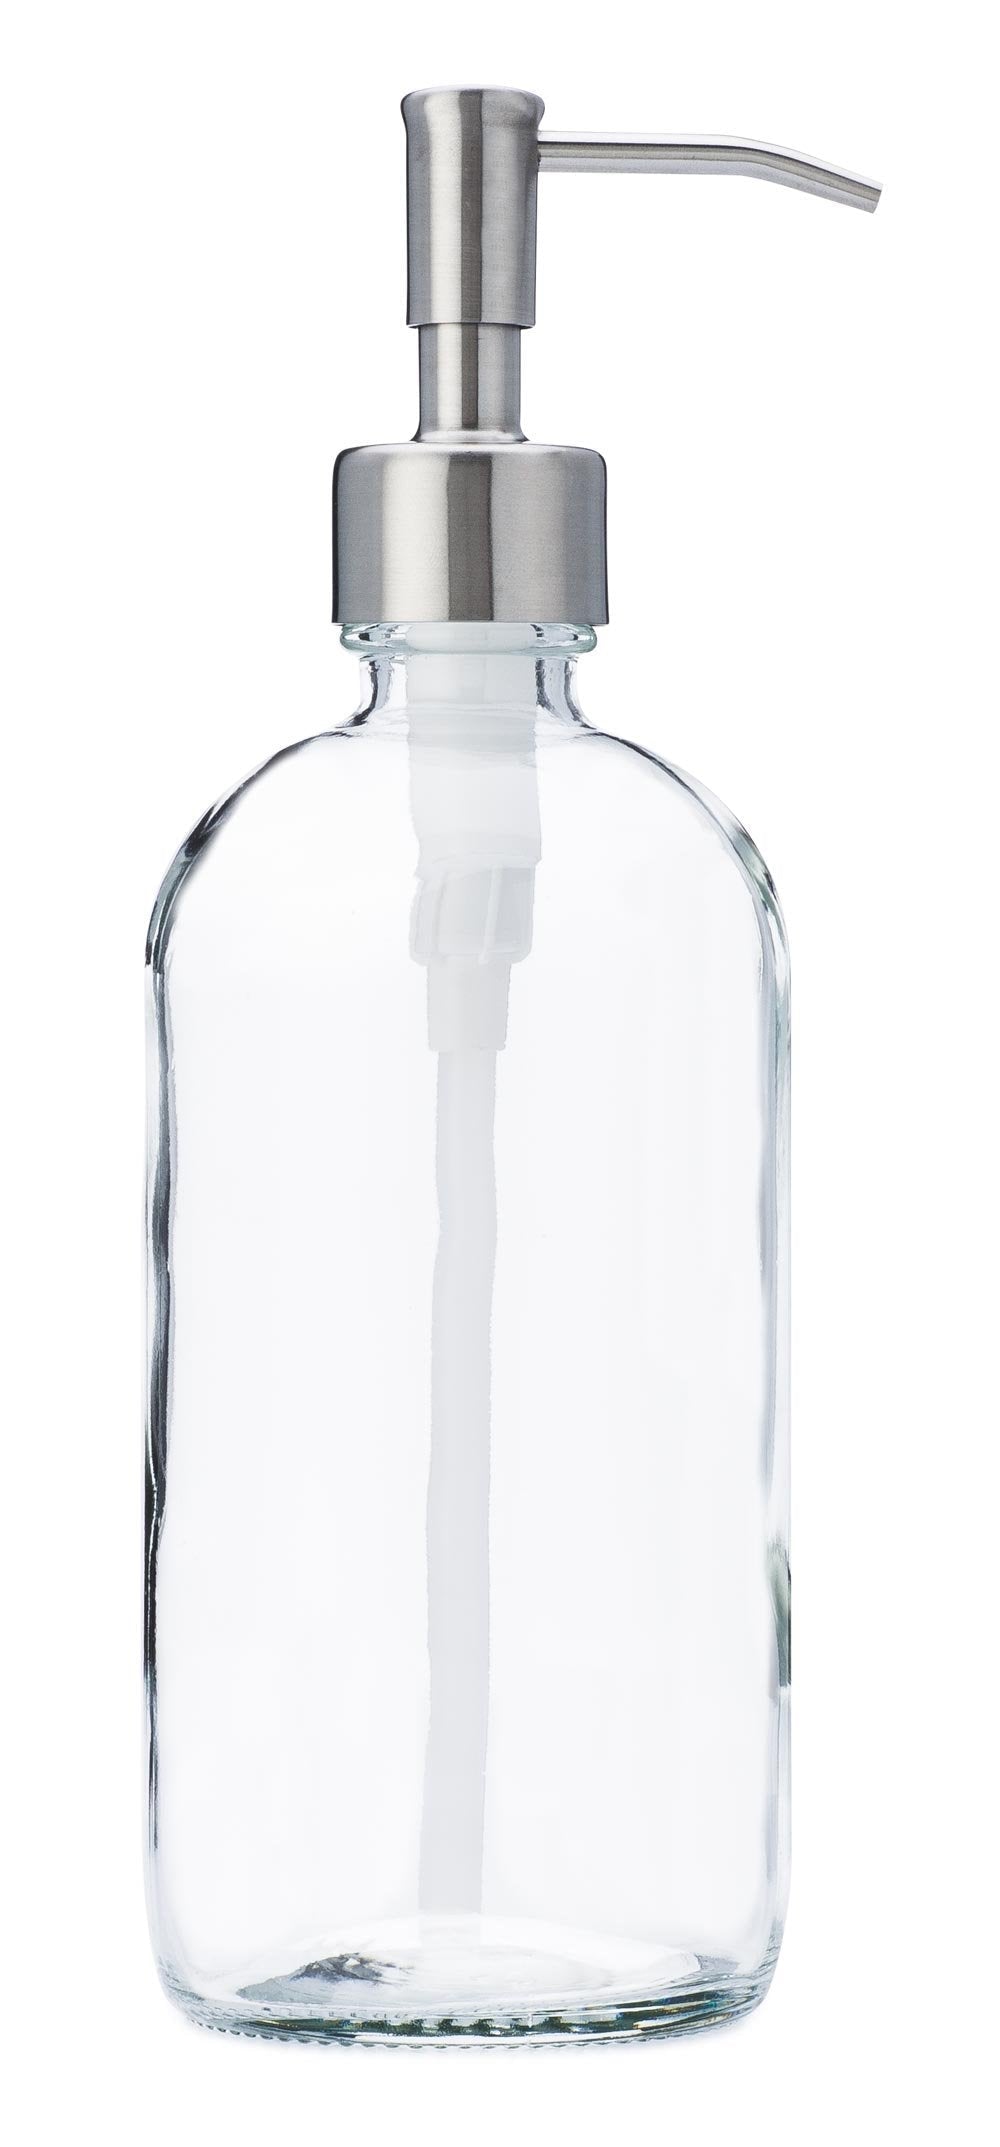 Clear Glass Jar Soap and Lotion Dispenser with Stainless Steel Pump - 16 oz - by Jarmazing Products - NewNest Australia